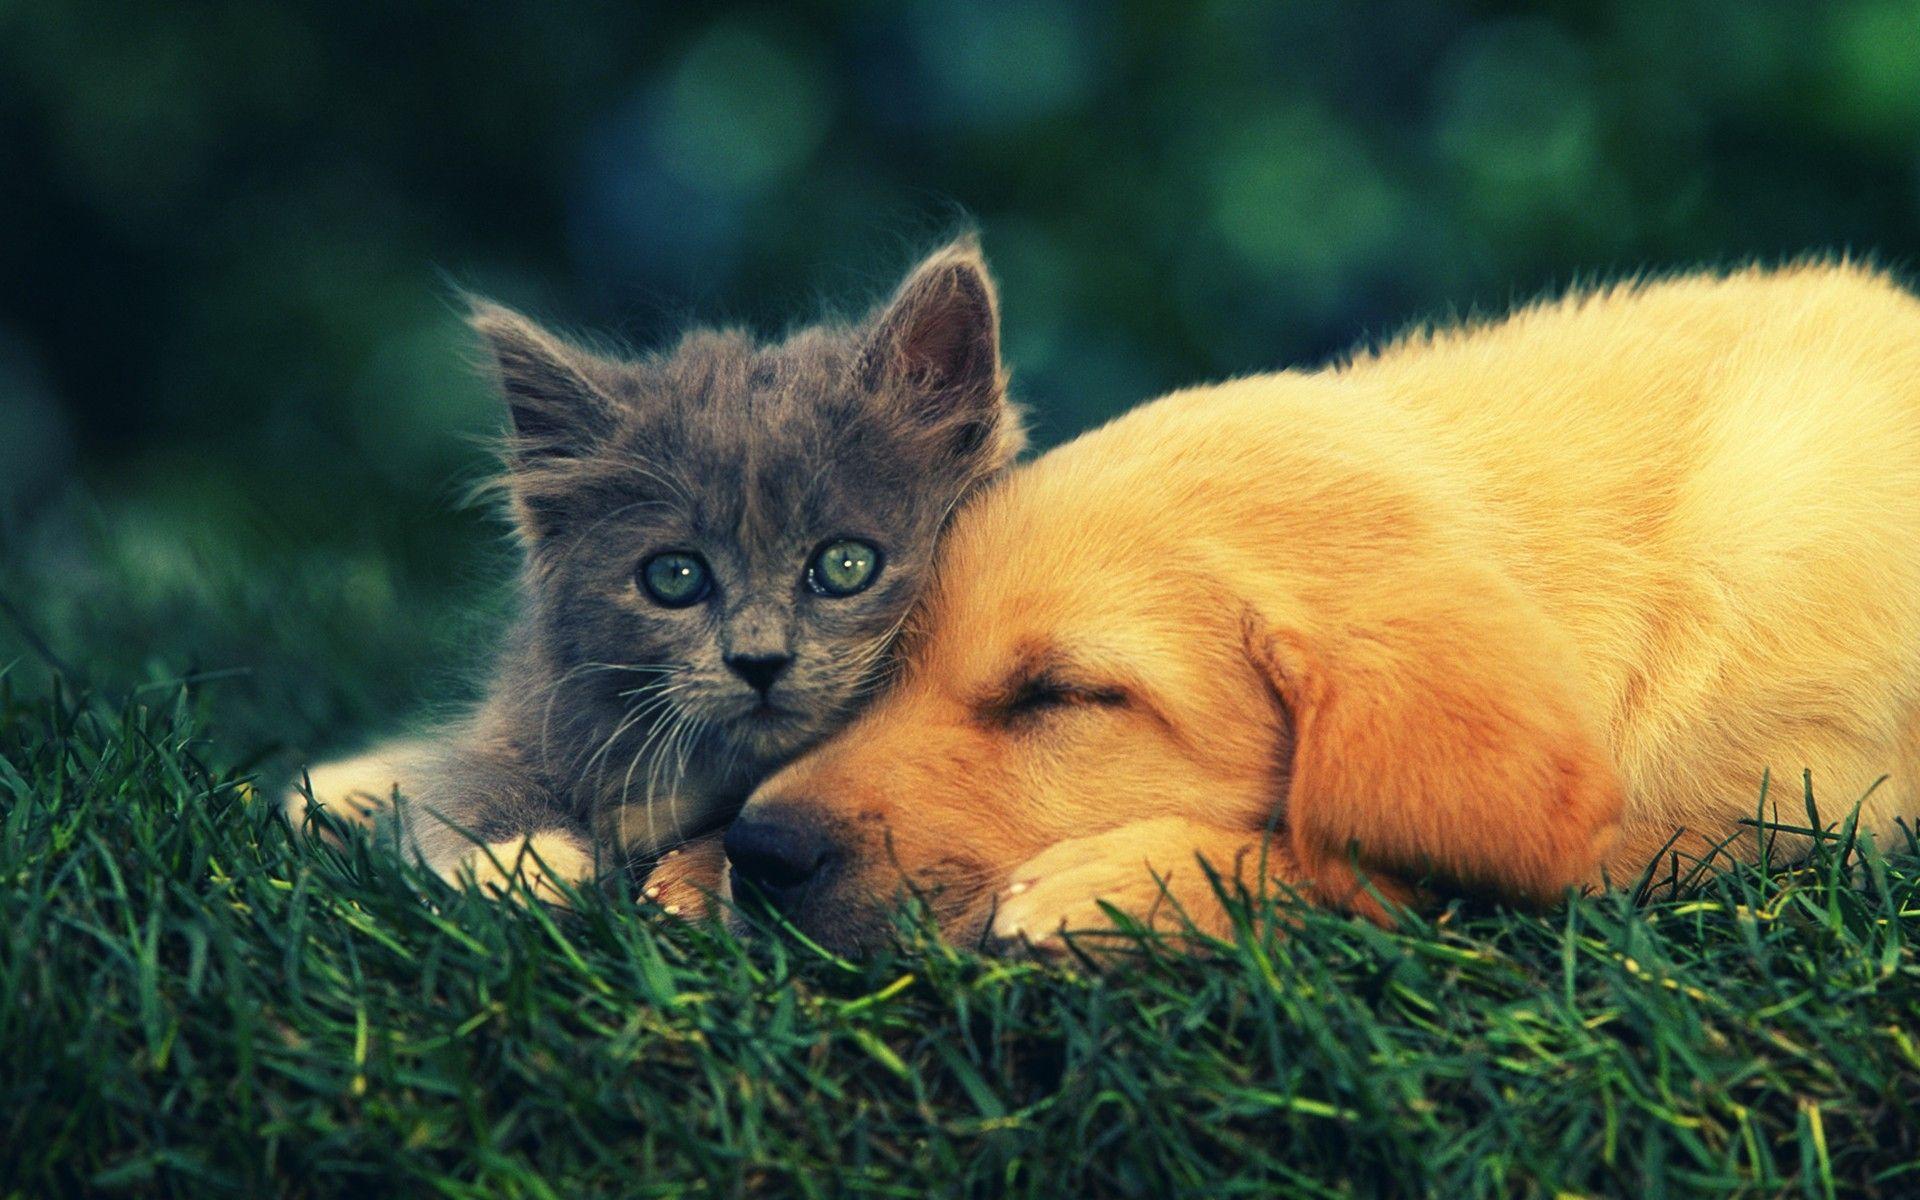 Cute Cat and Dog Best Friends. Family photo ideas. Kittens